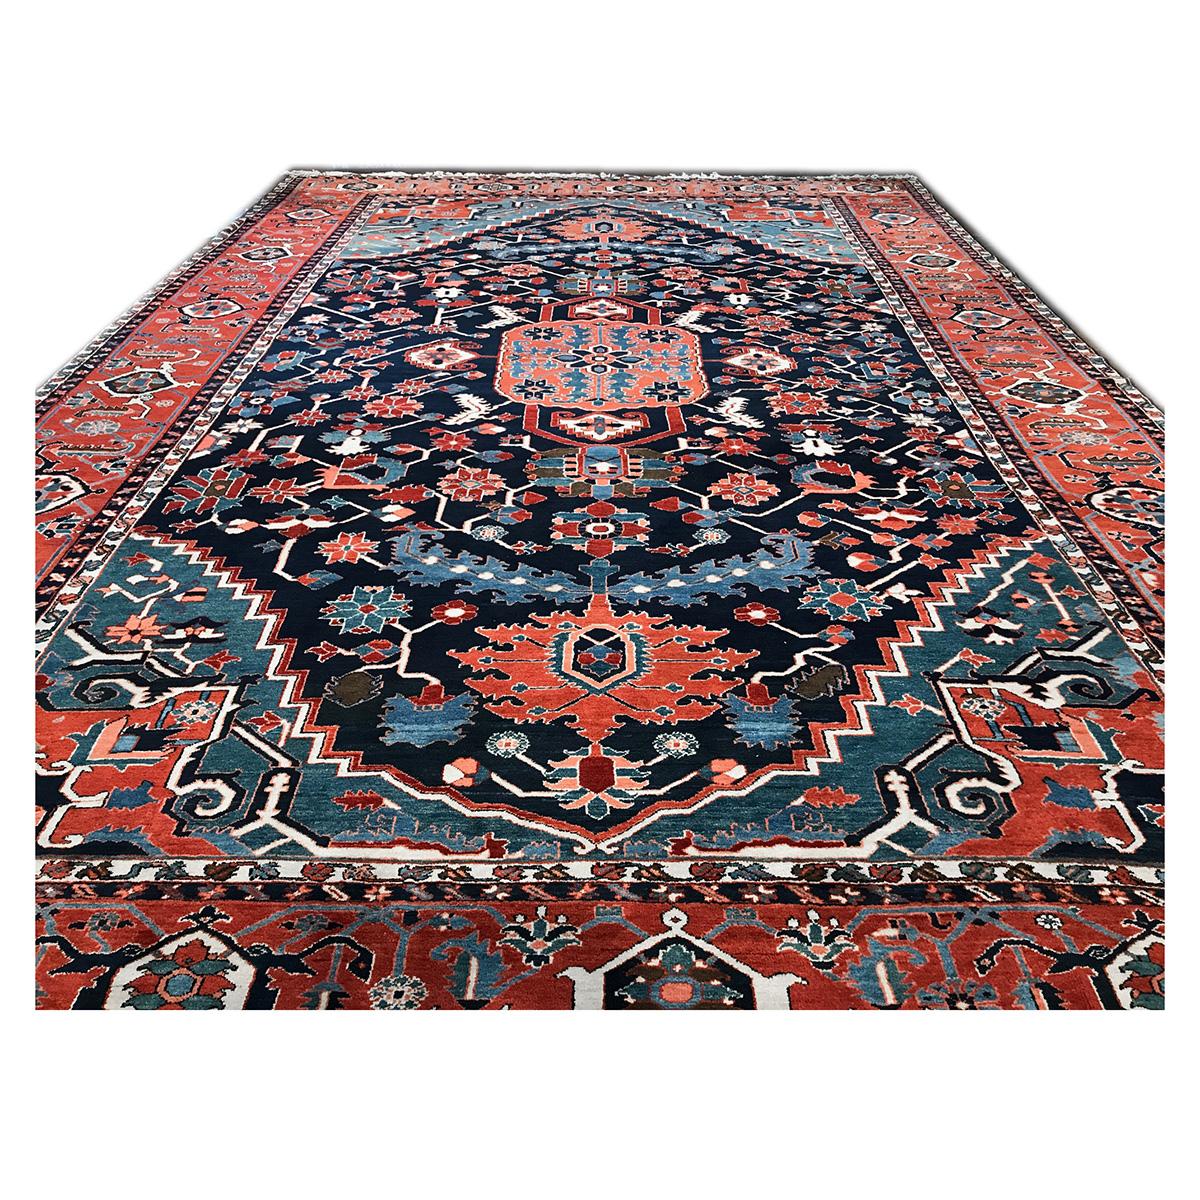 Ashly Fine Rugs presents an original Vintage Persian Serapi palace-sized area rug. Part of our own previous production, this antique recreation was thought of and created in-house and handmade in Persia by our master weavers. Persian Serapi rugs are